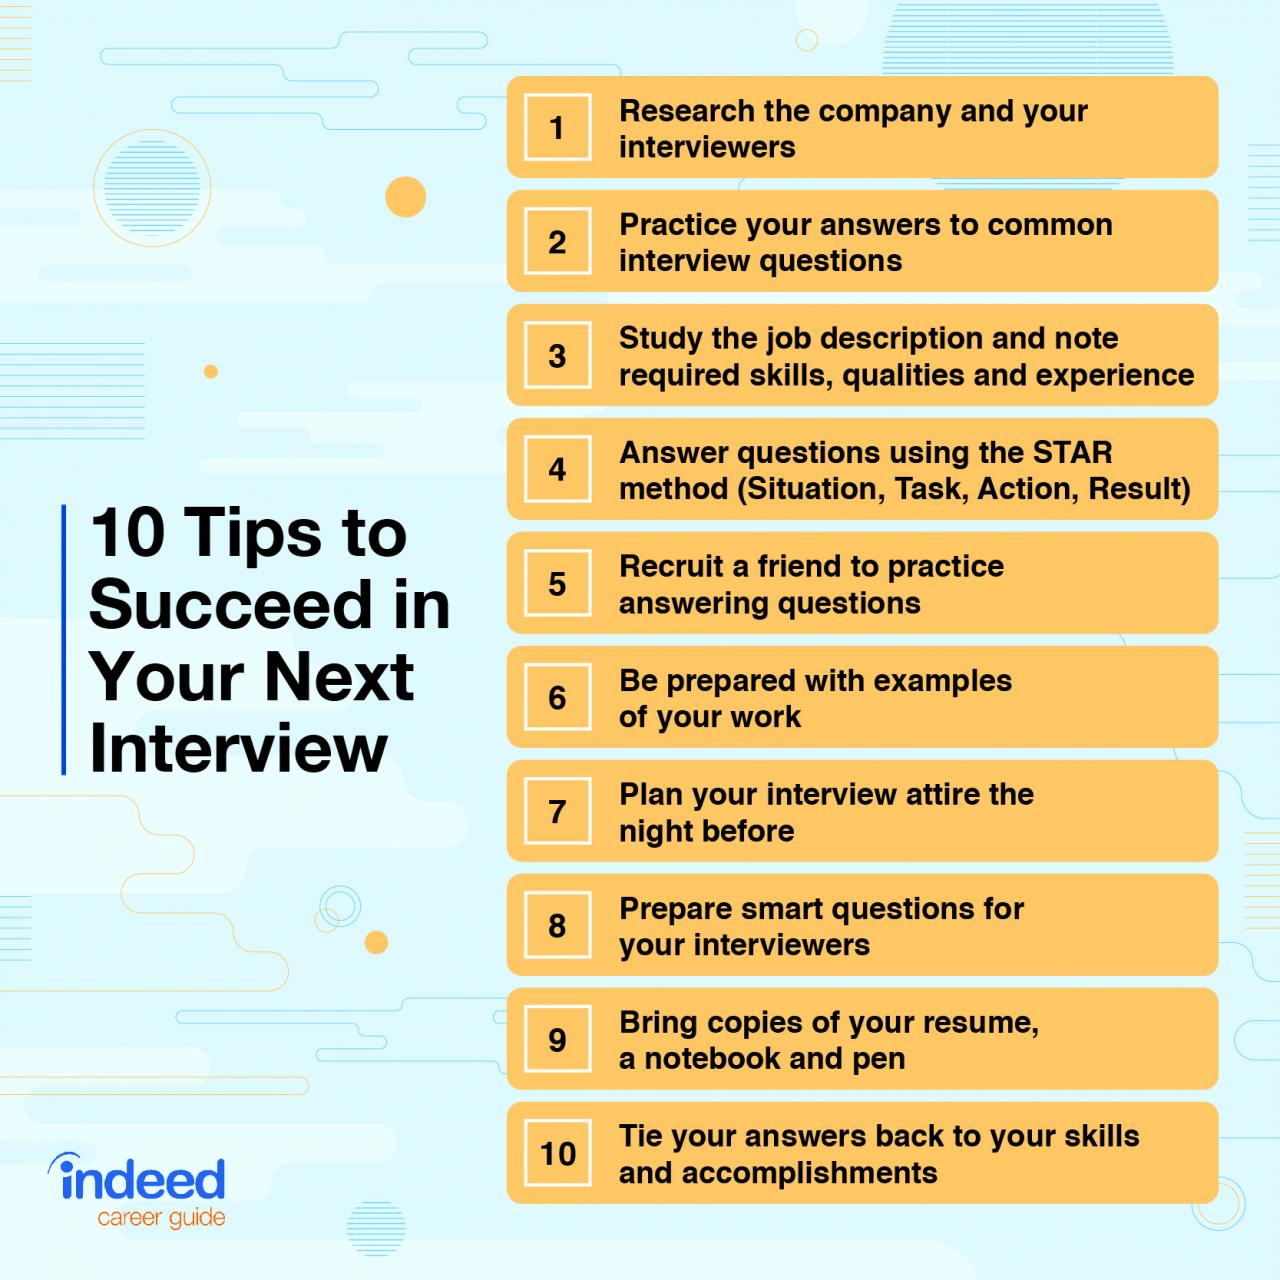 Effective questions to ask an interviewer